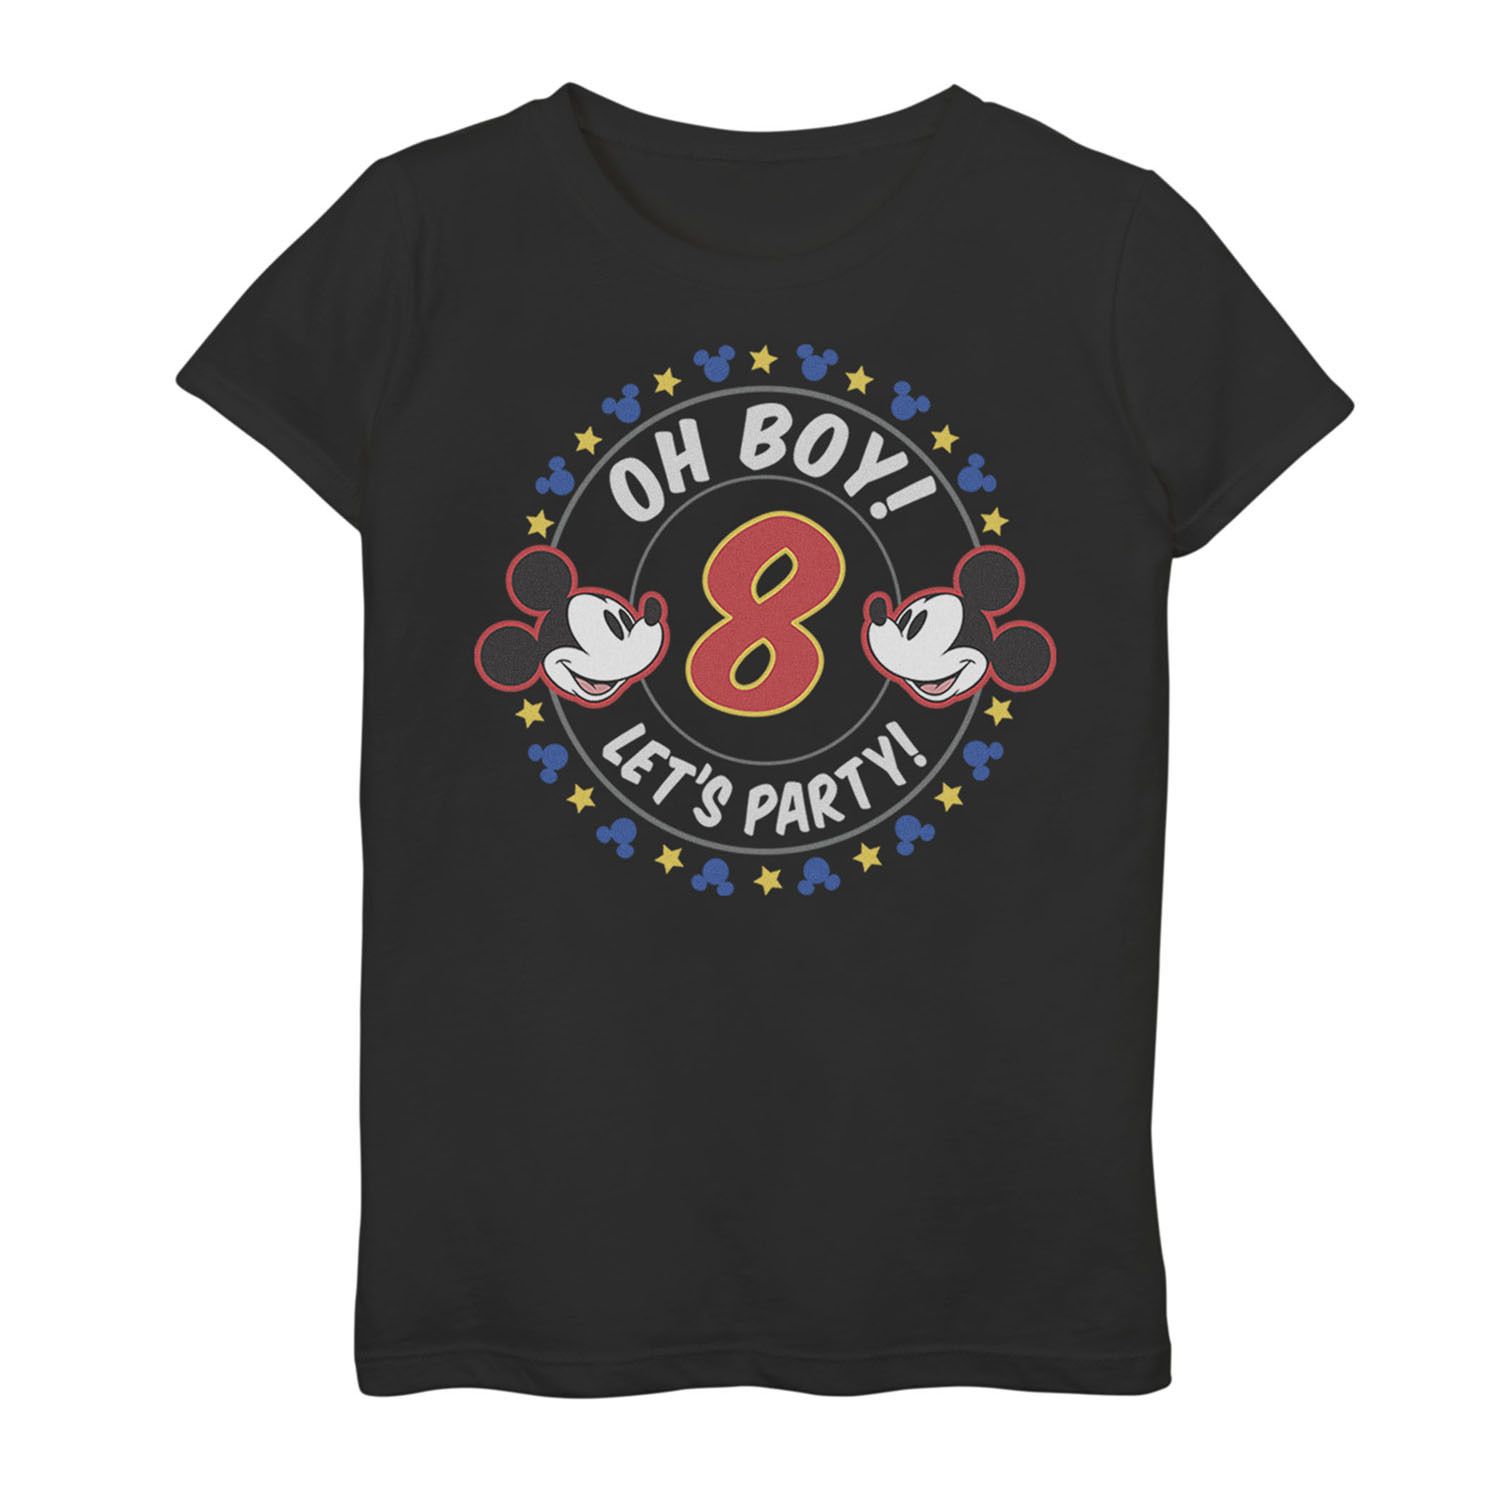 Image for Disney Girls 7-16 's Mickey Mouse Oh Boy Let's Party 8th Birthday Tee at Kohl's.